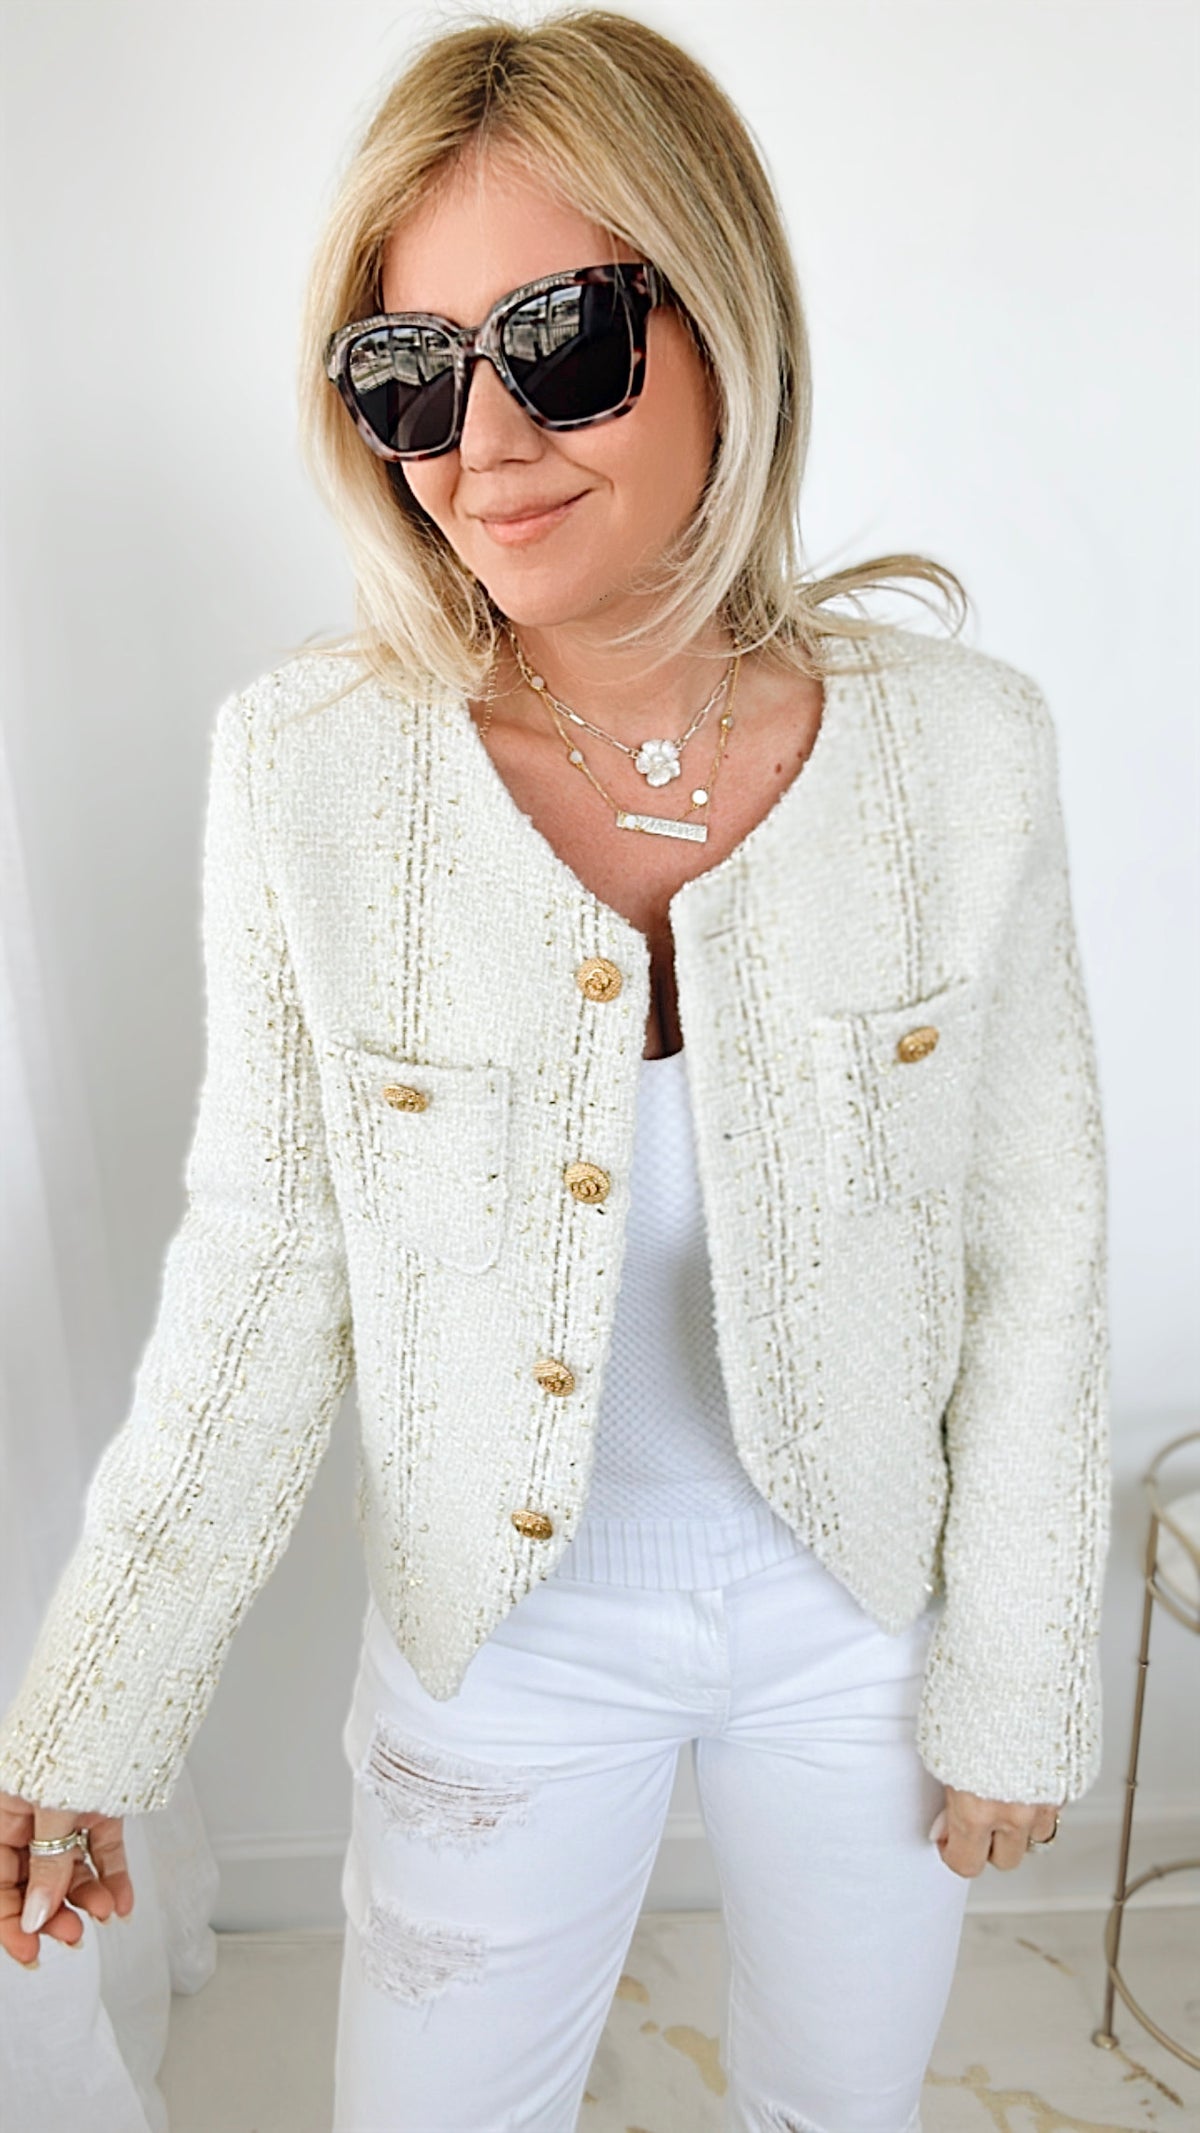 Gold Stripe Tweed Blazer - White-160 Jackets-Helen's Heart-Coastal Bloom Boutique, find the trendiest versions of the popular styles and looks Located in Indialantic, FL